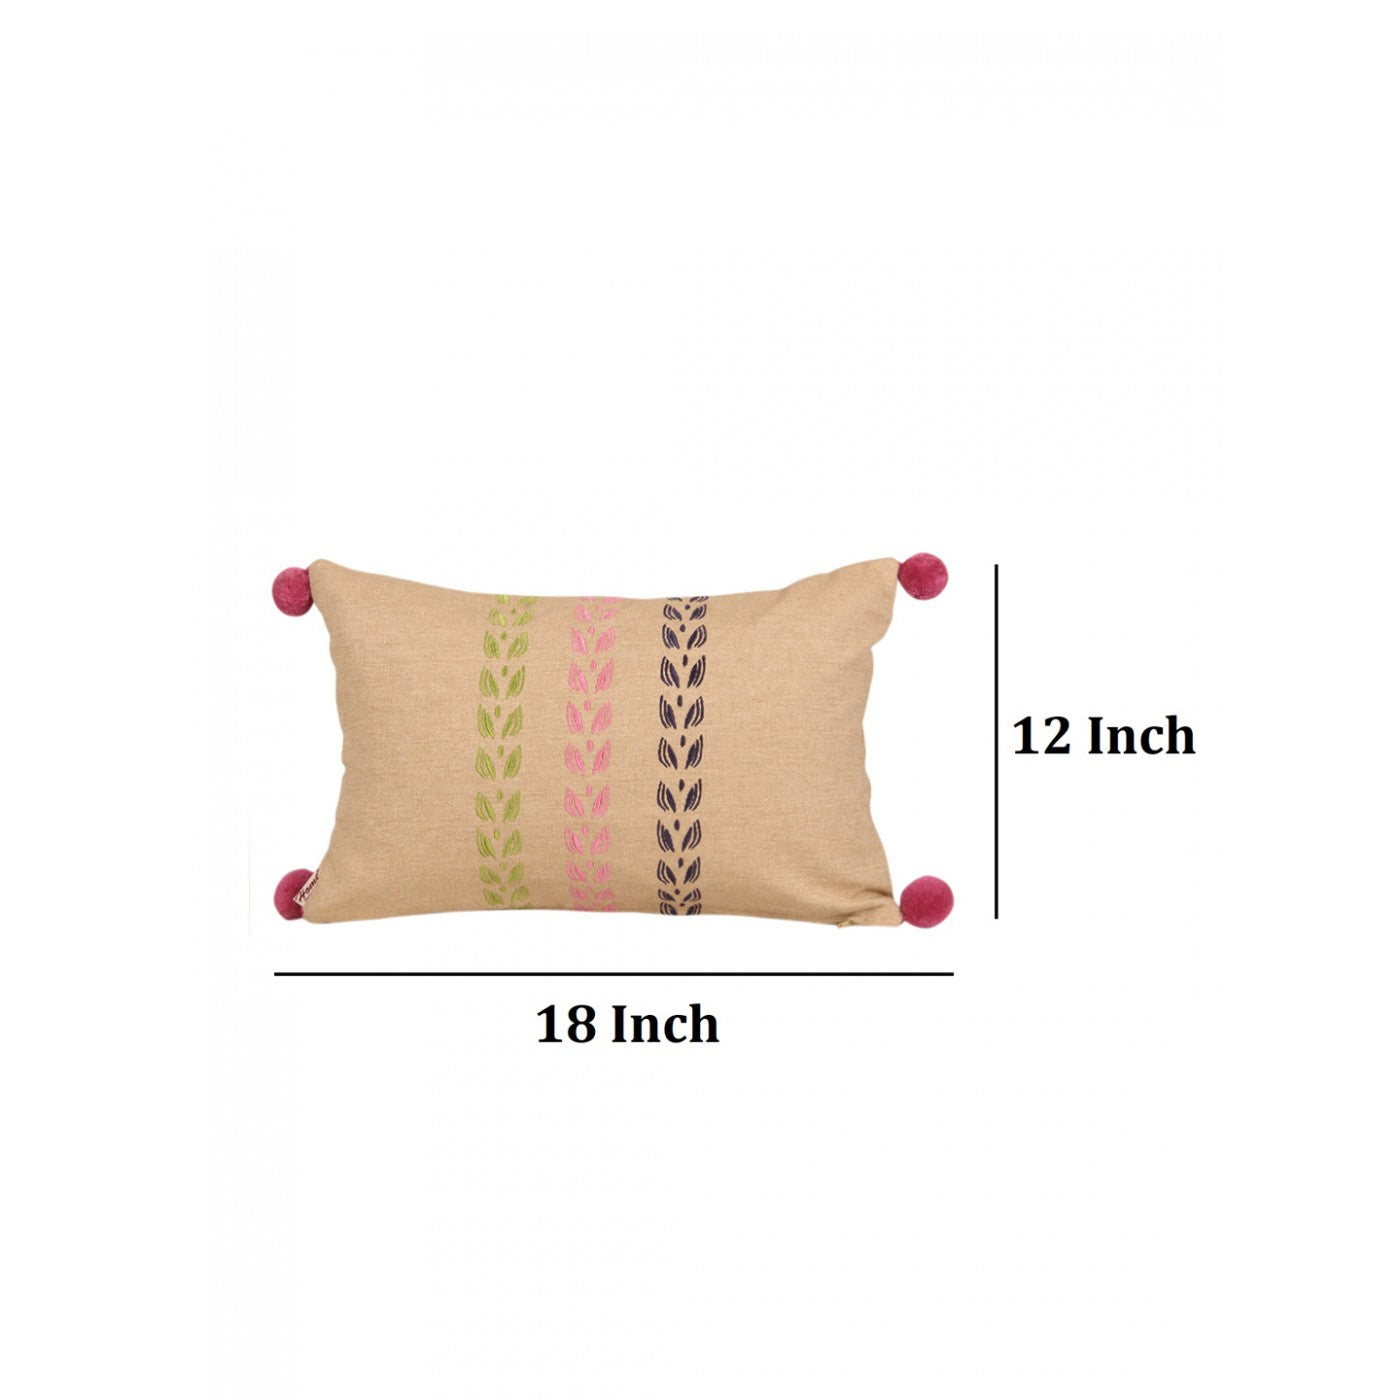 Chambray Charm 16x16 Inch Beige Embroidered Cushion Cover